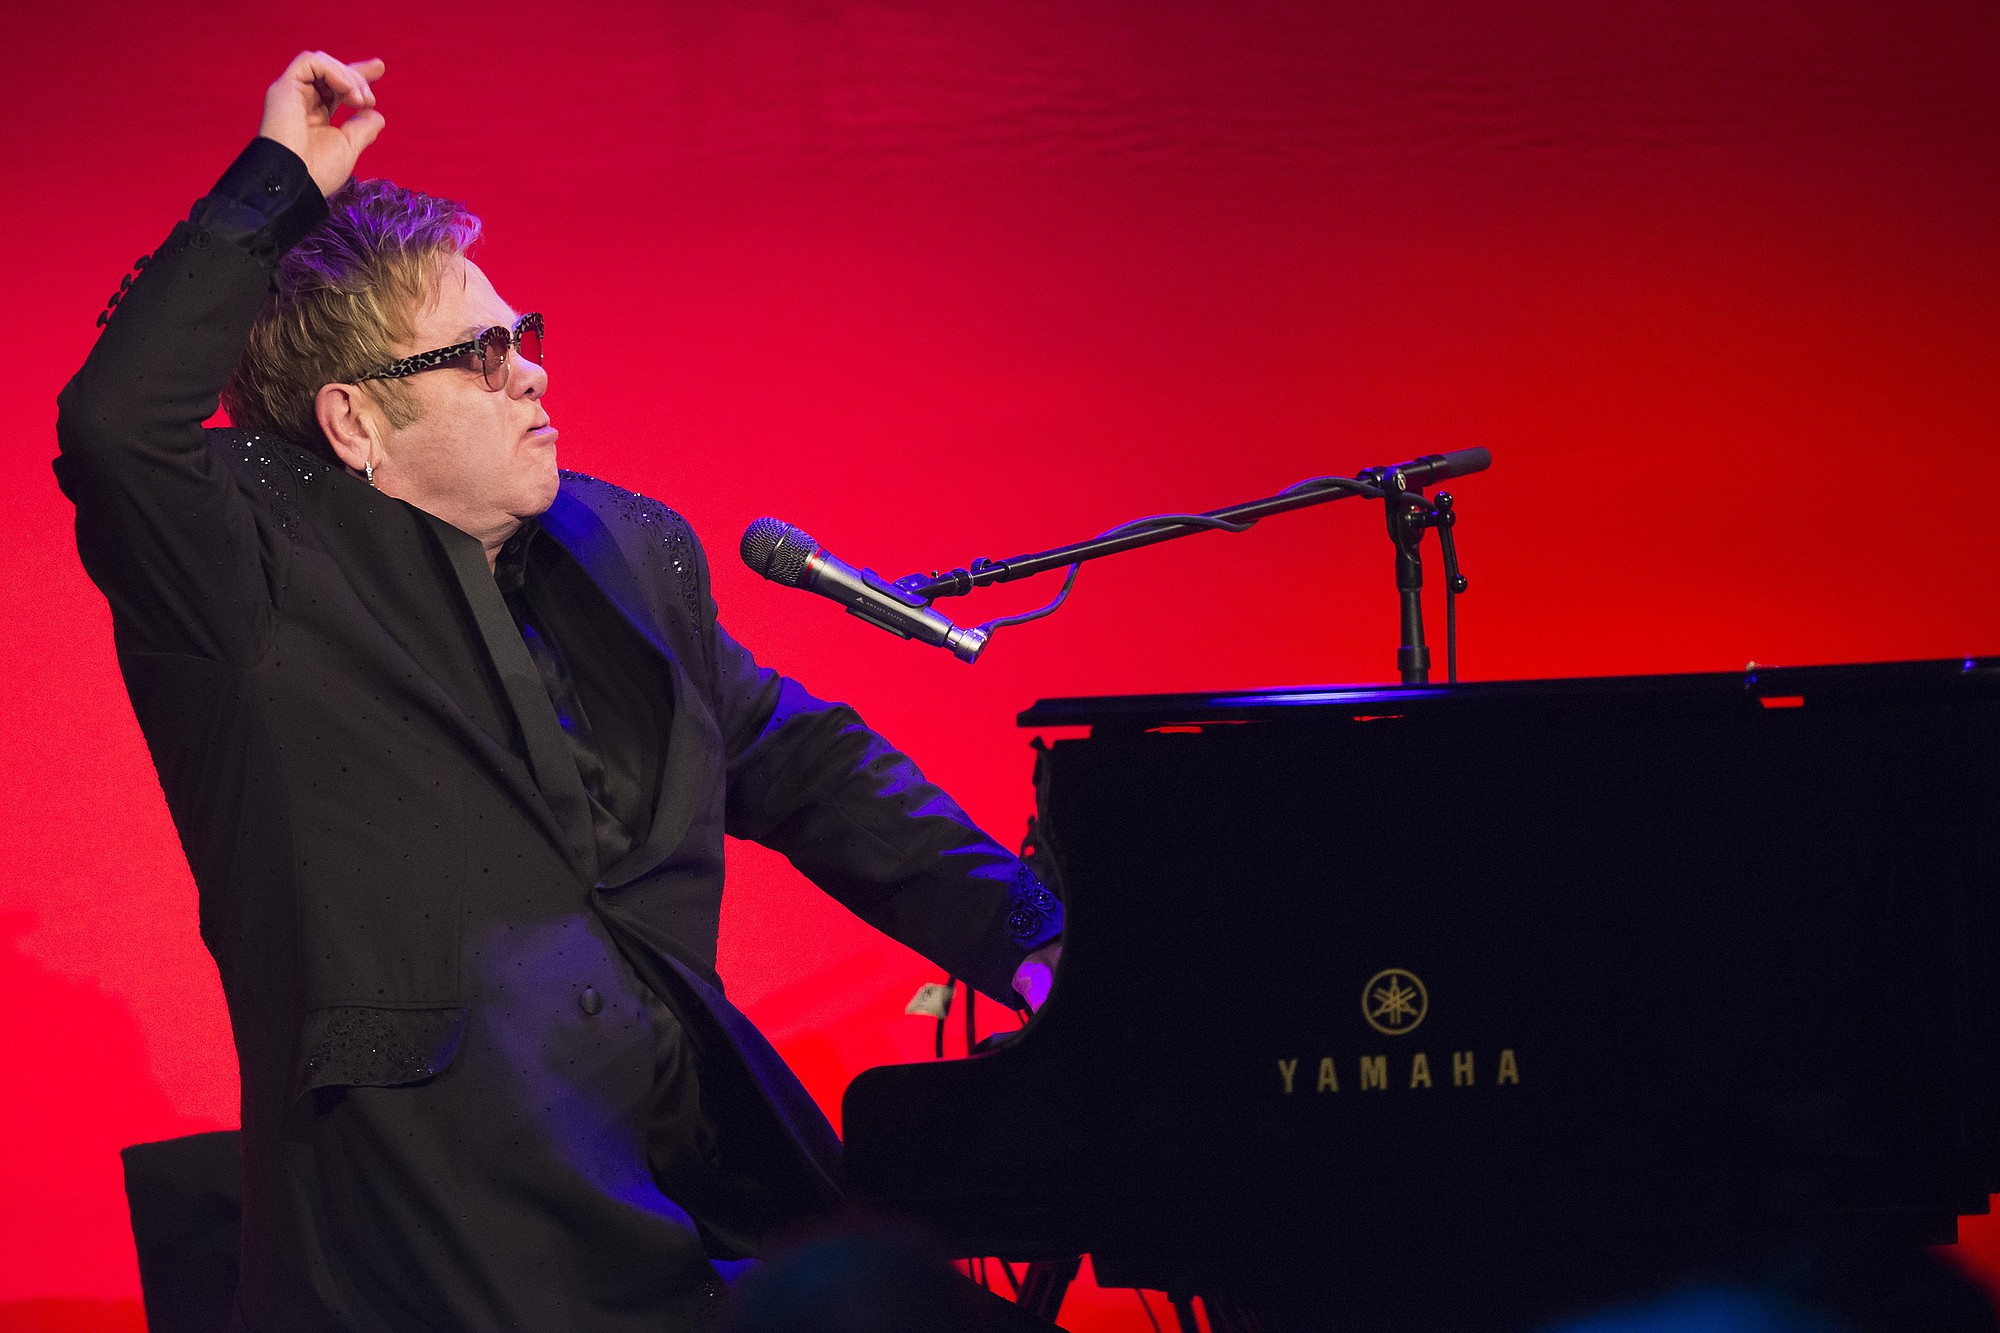 Elton John performs at the Elton John AIDS Foundation's 13th Annual &quot;An Enduring Vision&quot; benefit at Cipriani's Wall Street on Tuesday in New York.